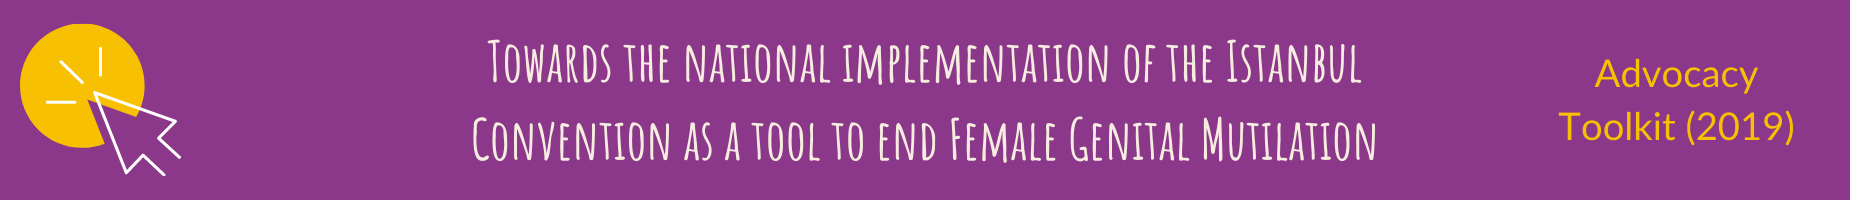 Towards the National Implementation of the Istanbul Convention as a Tool to End FGM - Advocacy Toolkit (2019)